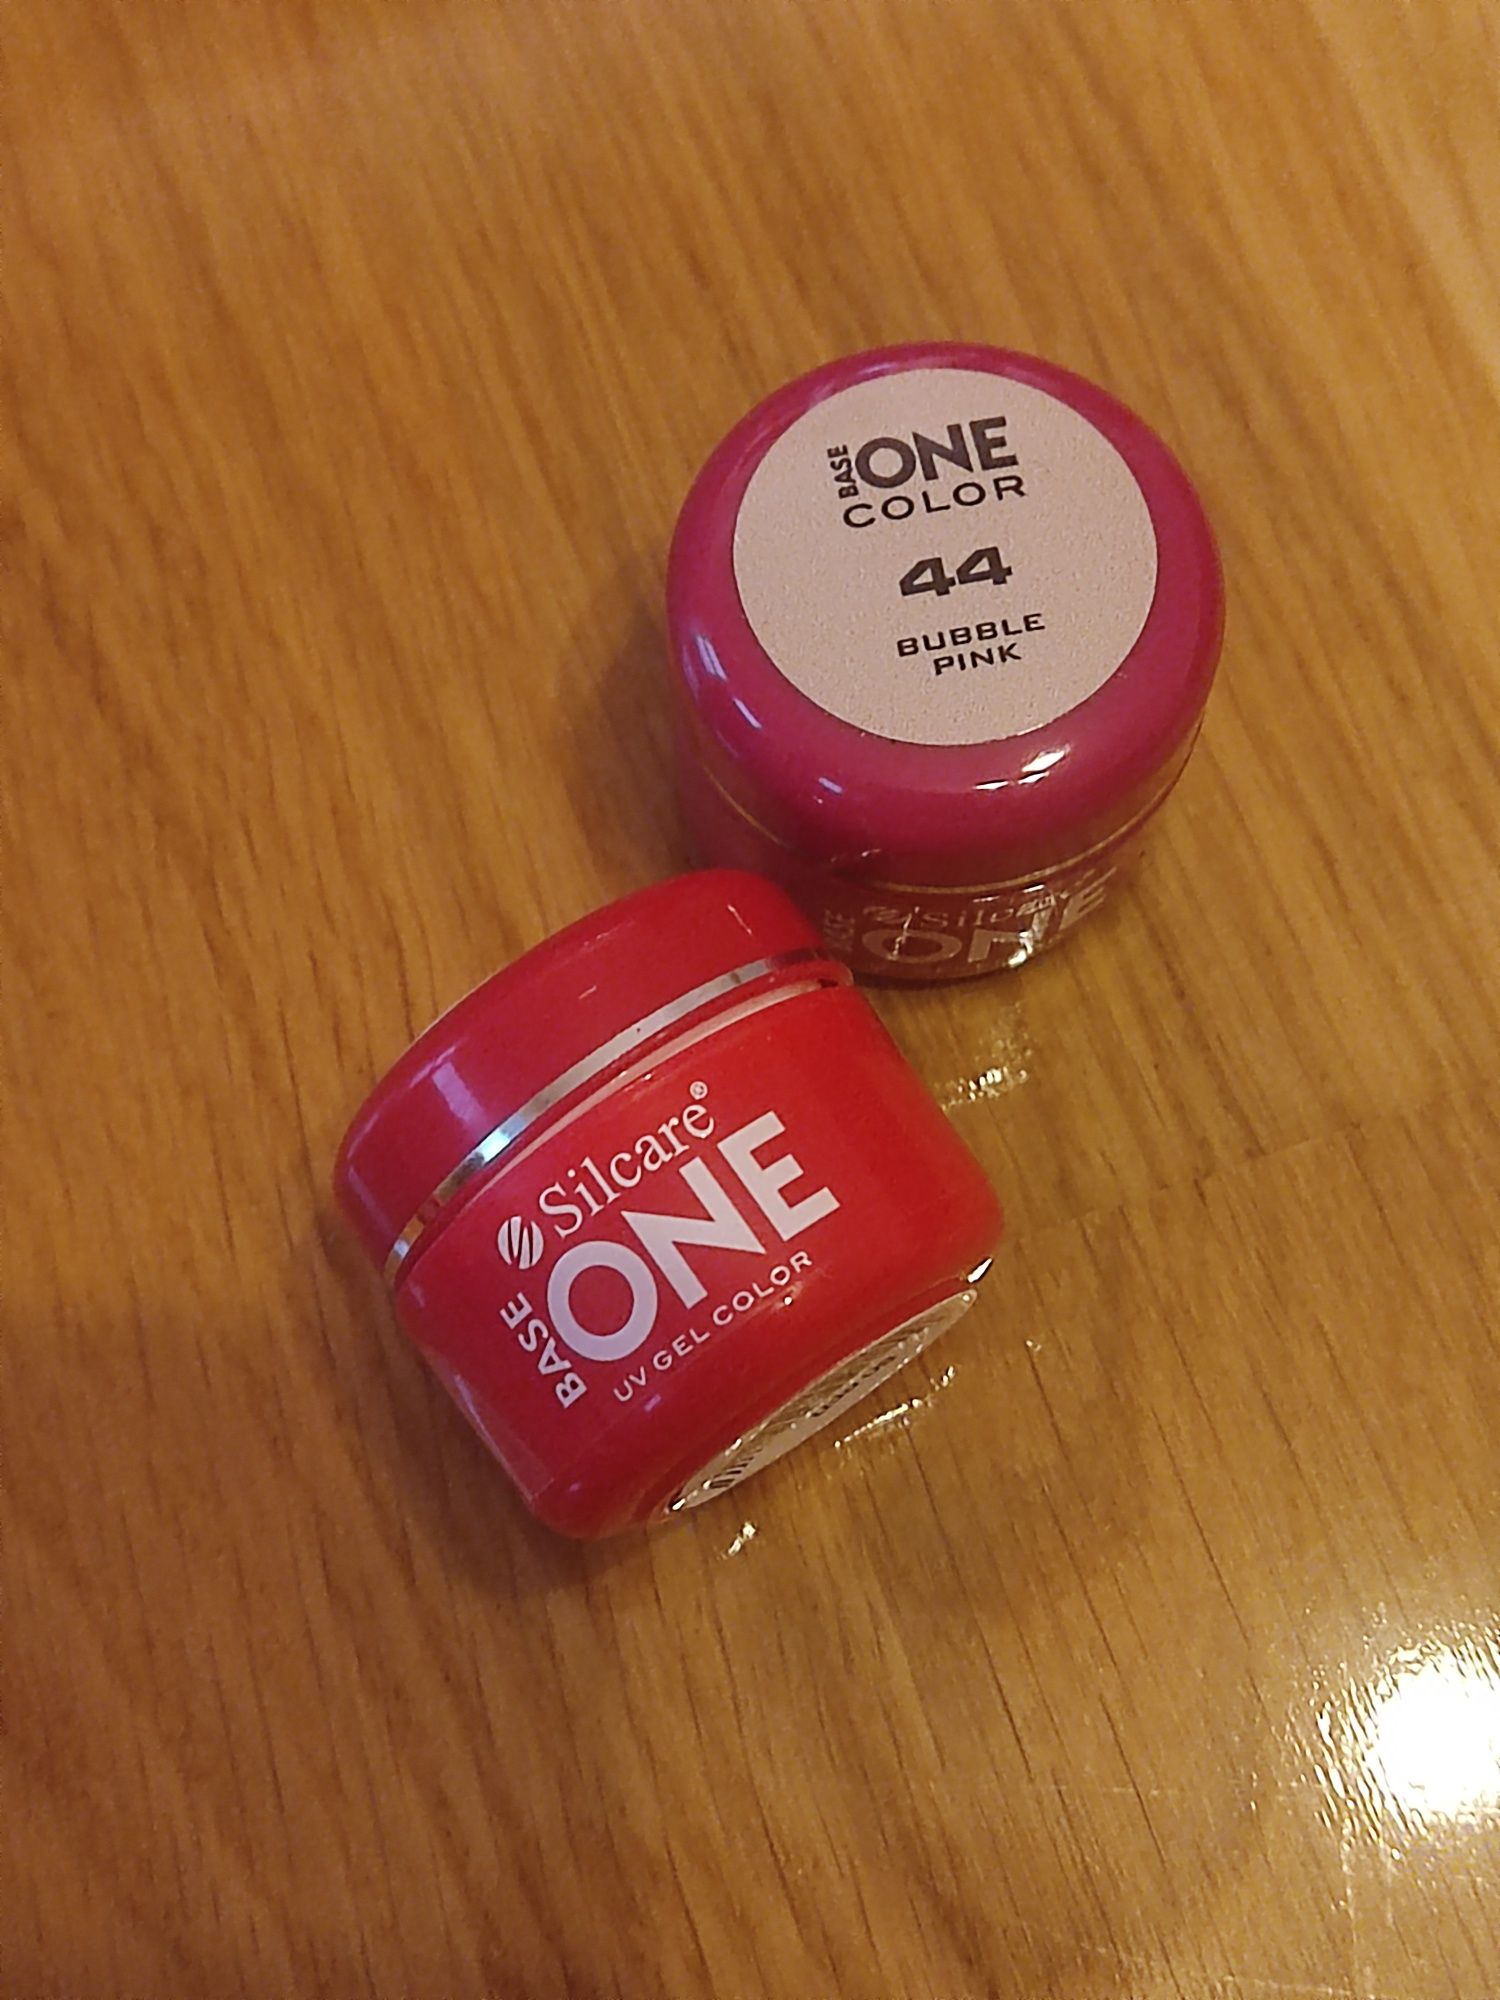 Nowy żel do paznokci silcare base one color UV gel 44 bubble pink mani